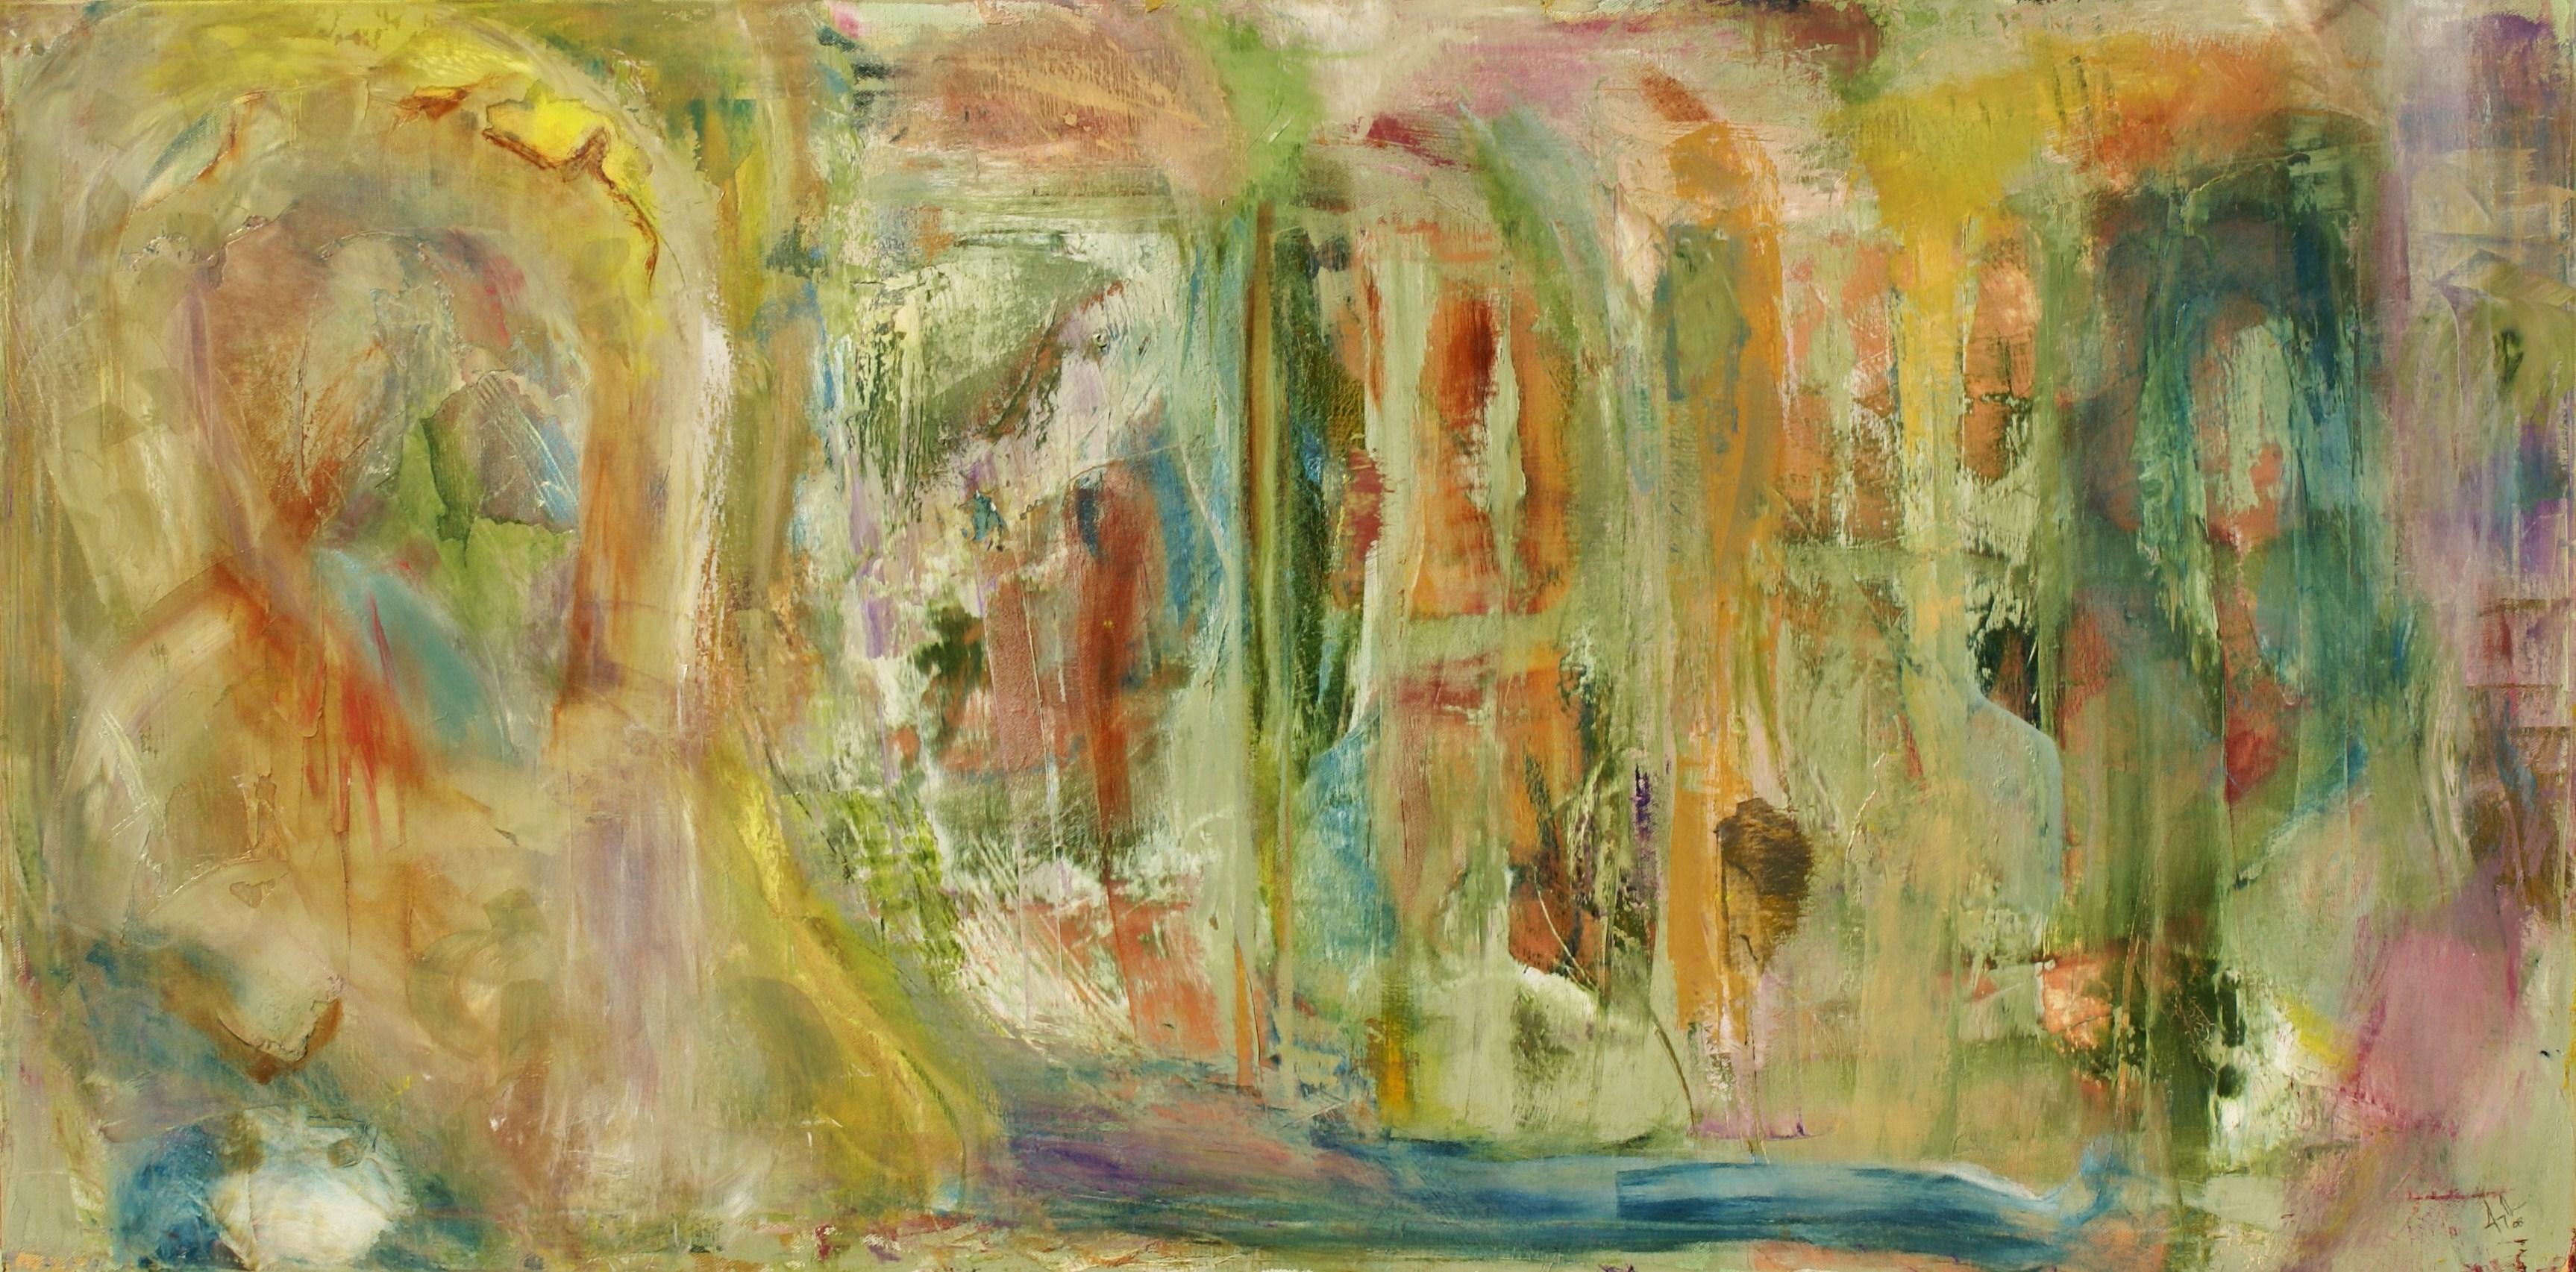 Joey Thate Abstract Painting - Waterfalls II, Painting, Oil on Canvas